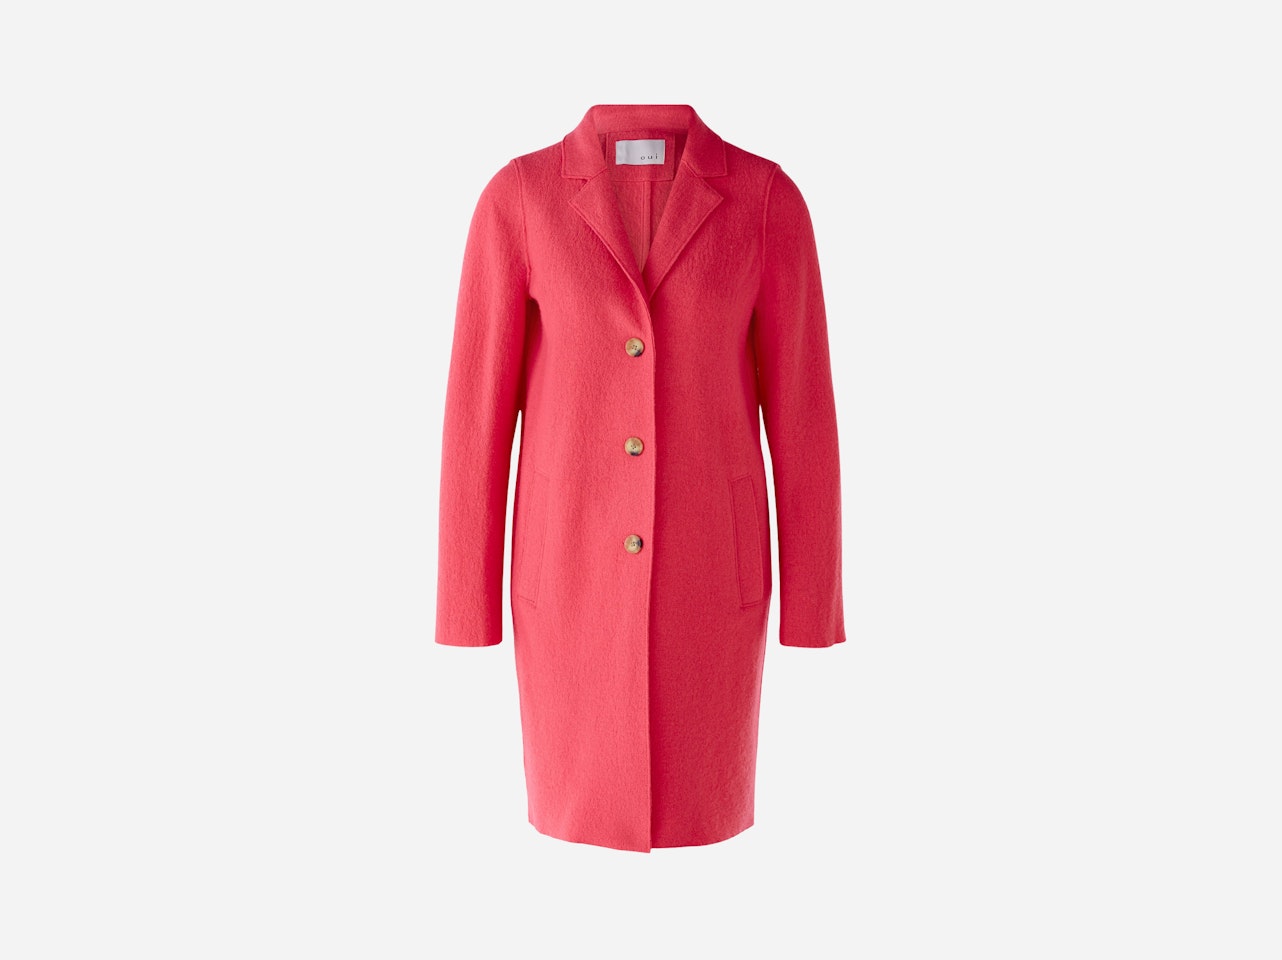 Bild 7 von MAYSON Coat boiled Wool - pure new wool in red | Oui